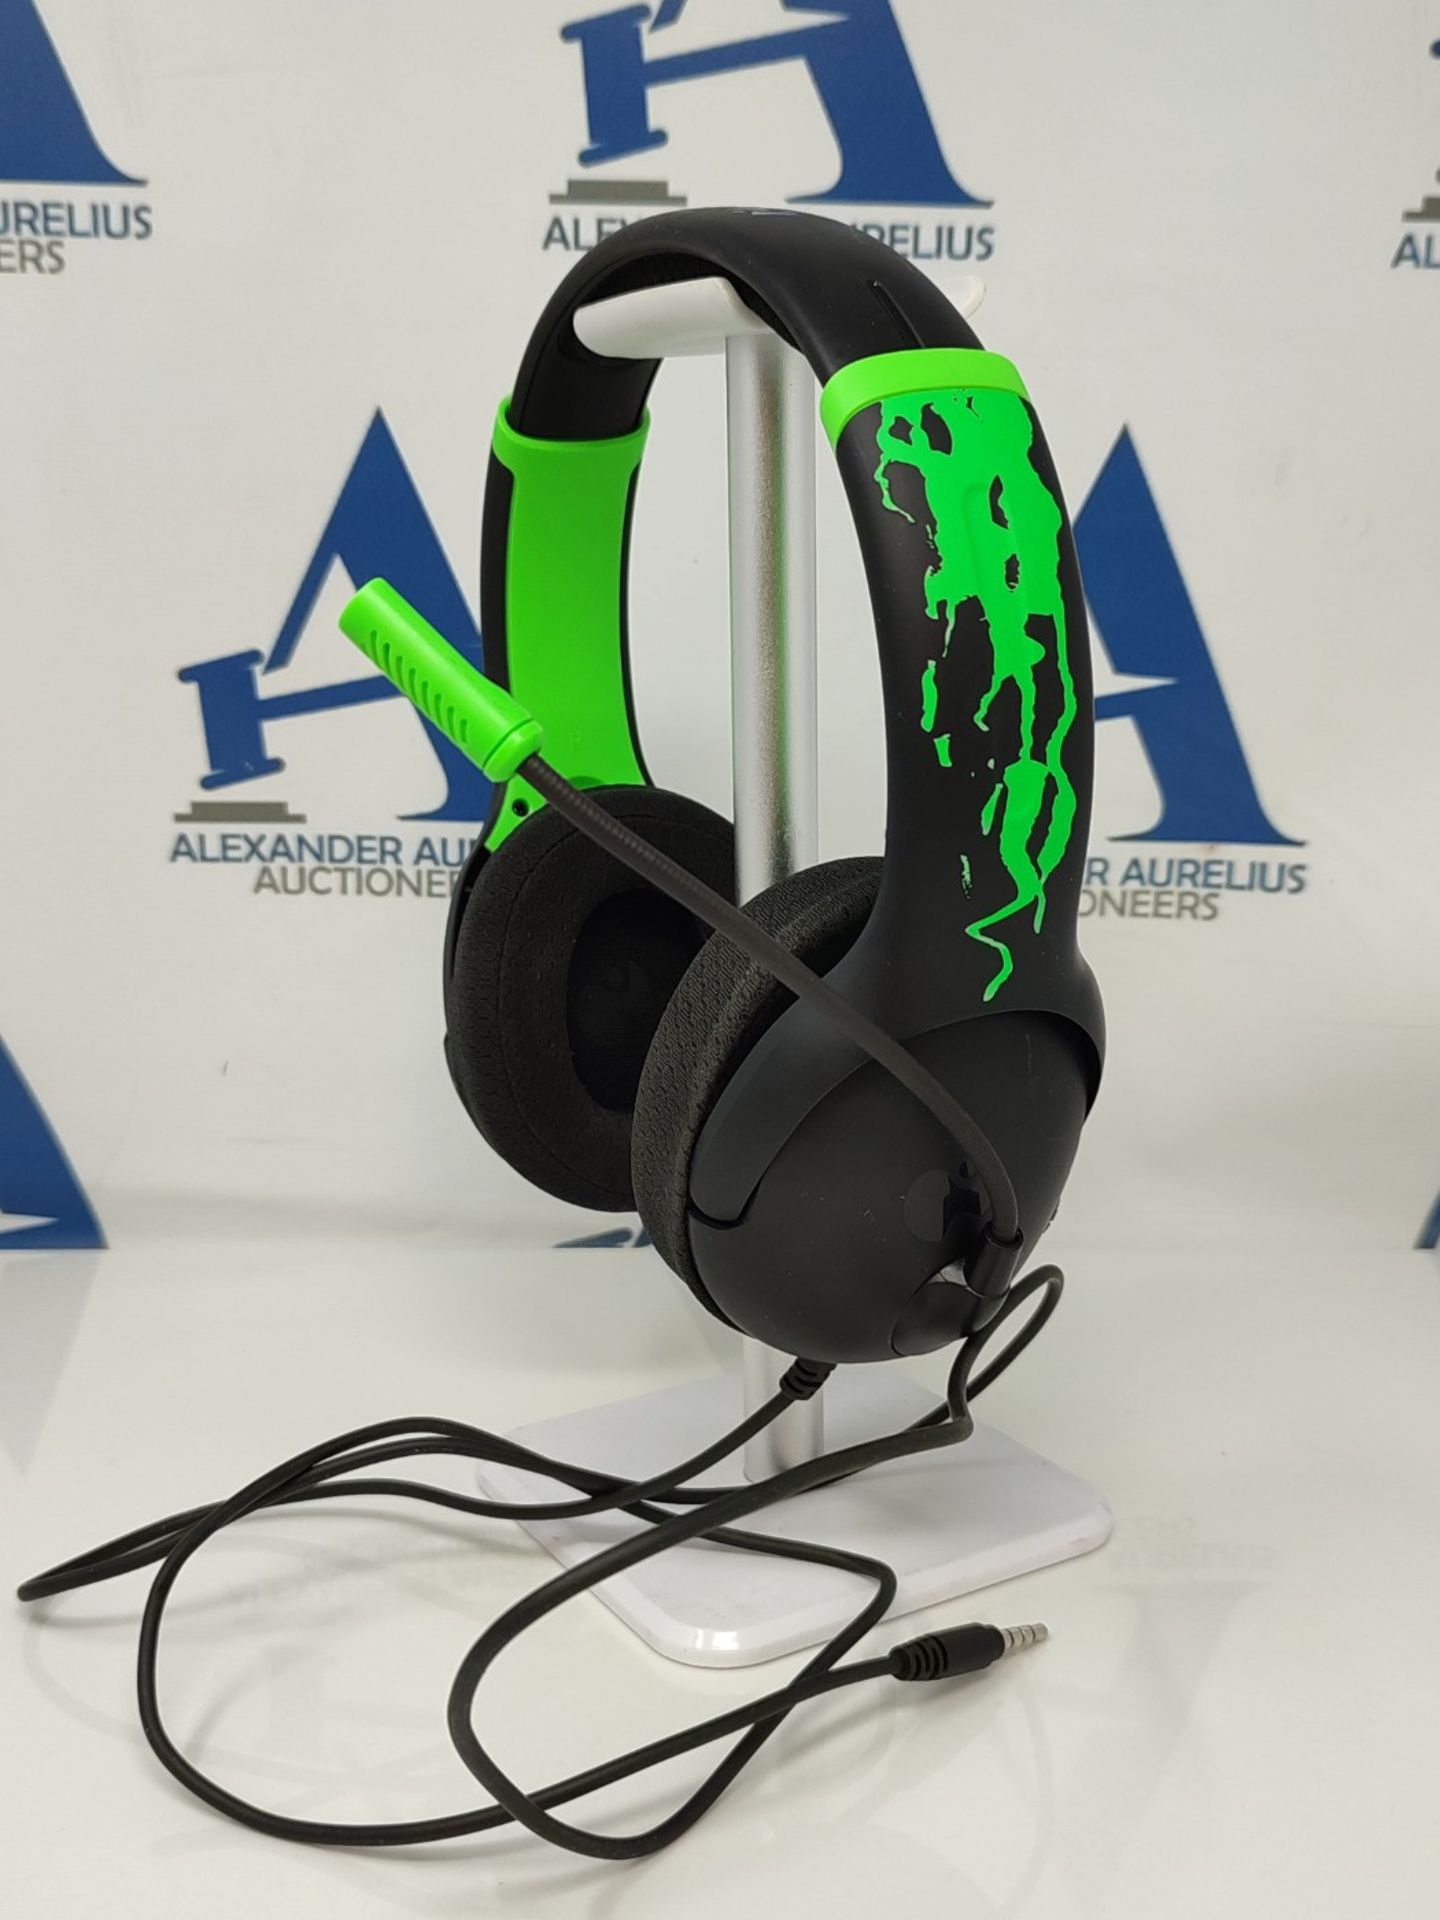 PDP Xbox AIRLITE Wired Headset Jolt Green - Image 3 of 3